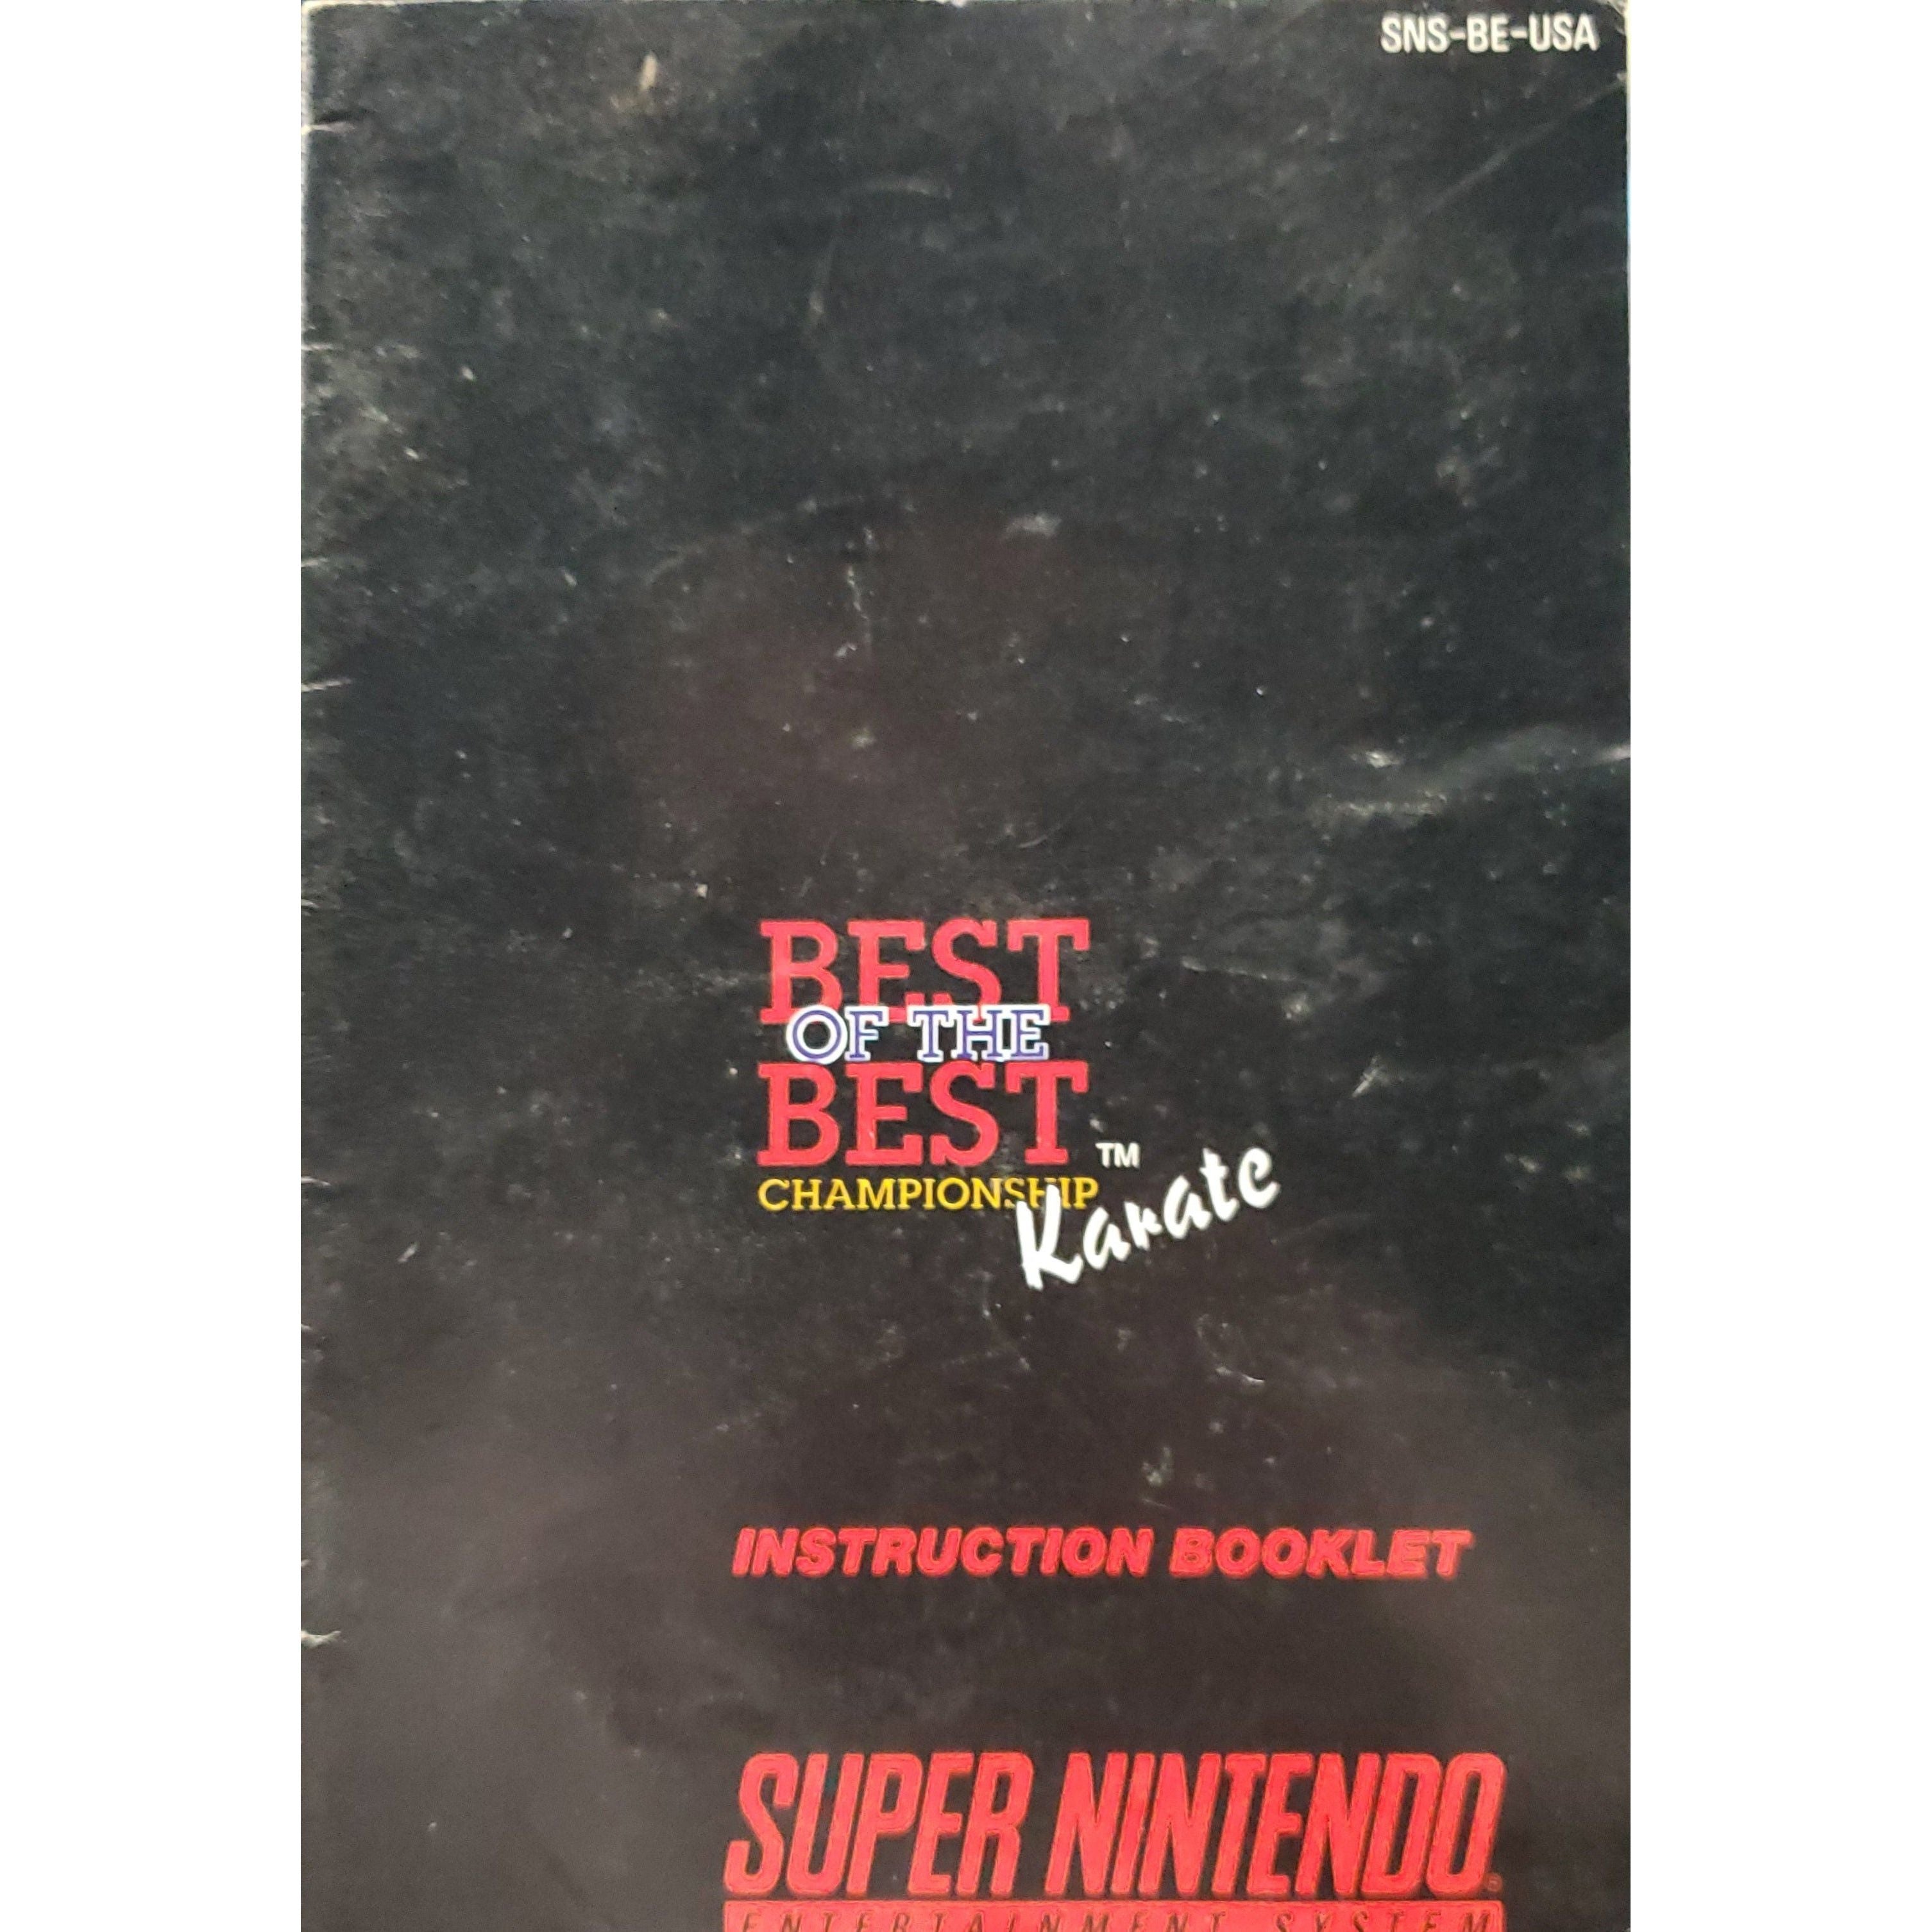 SNES - Best of the Best Championship Karate (Manual)